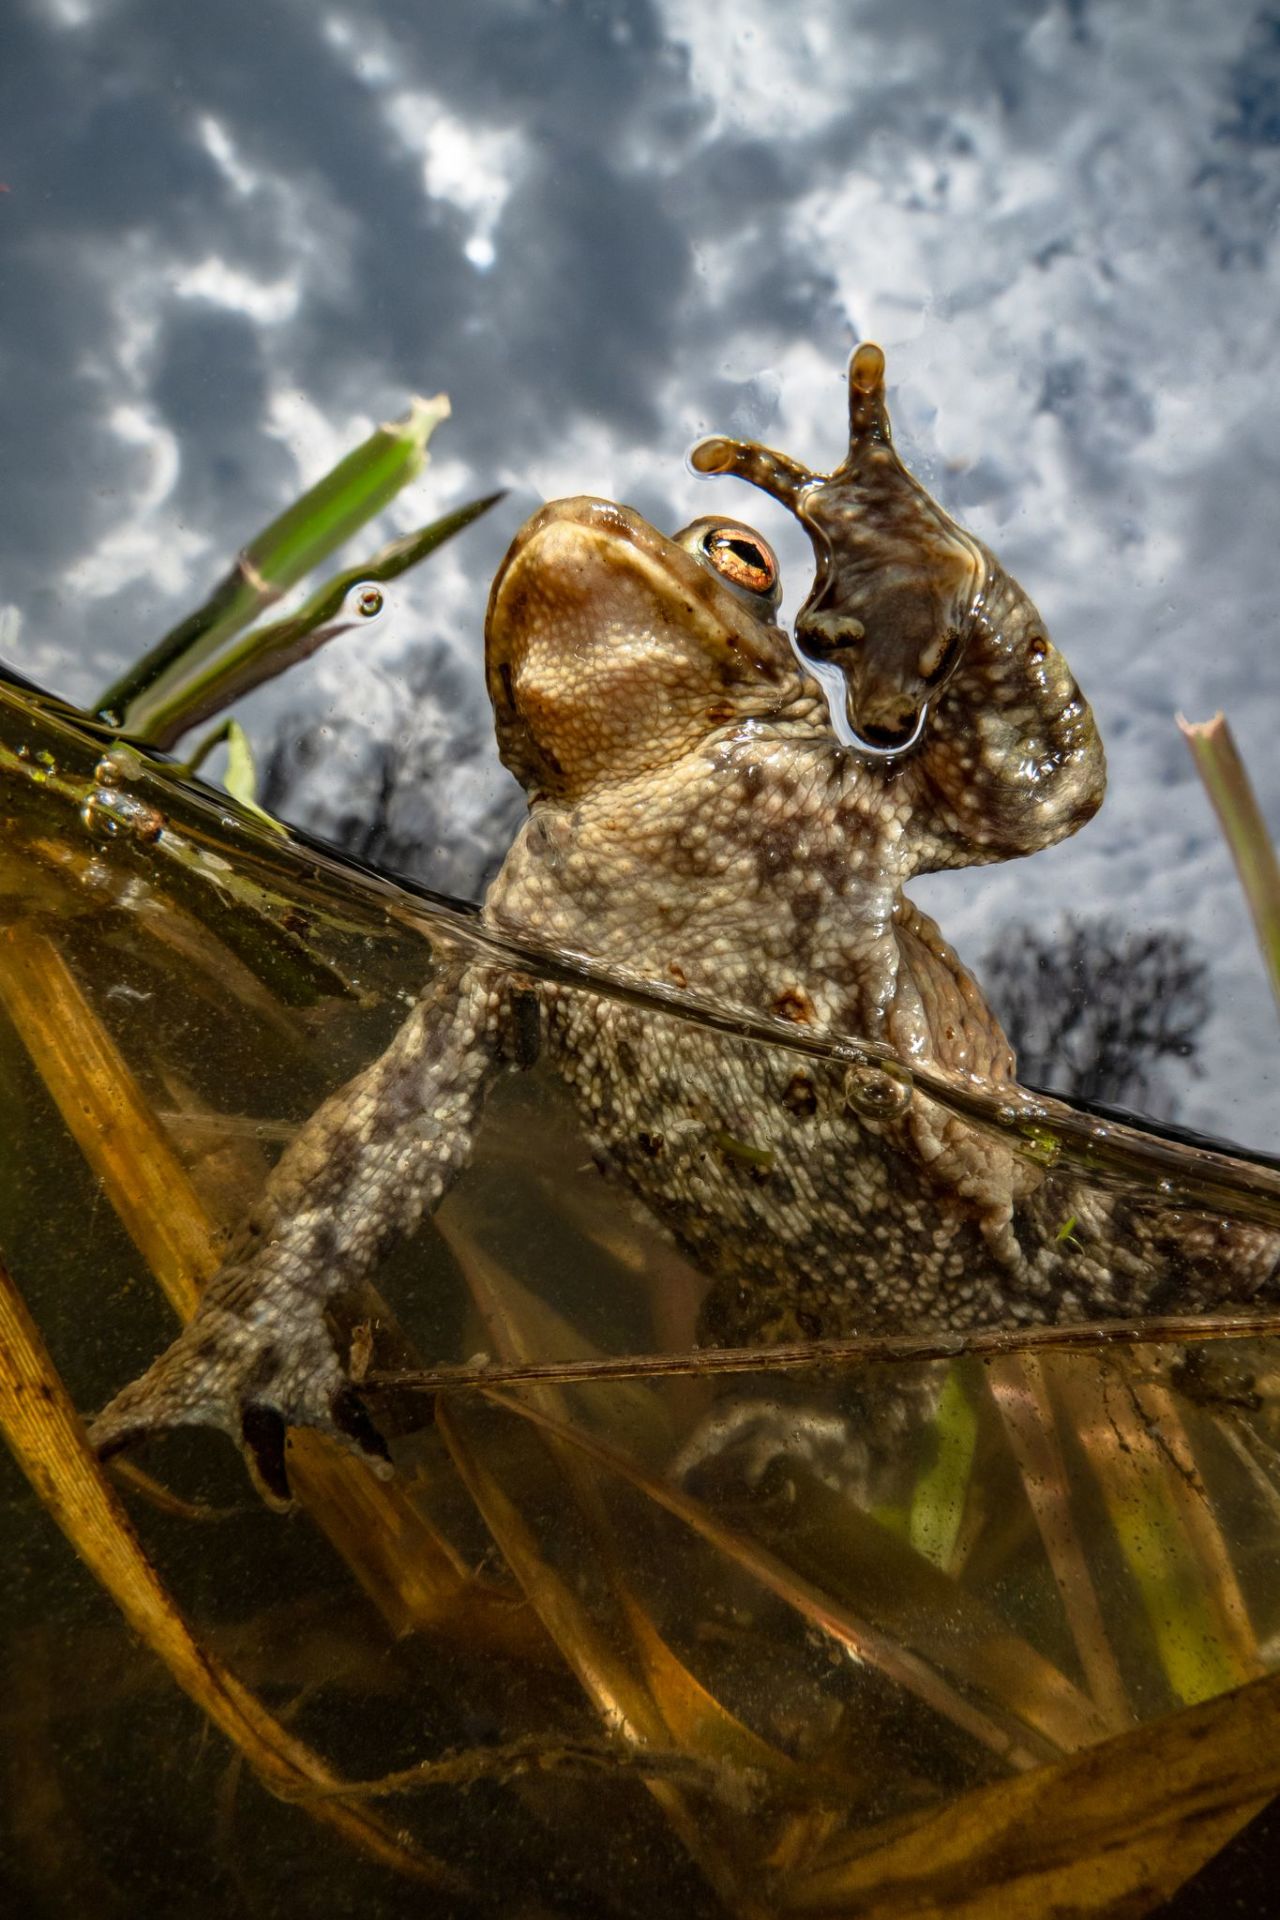 Winning first prize in the Compact Wide Angle category, Enrico Somogyi's photo gets up close and personal with a toad in Leipzig, Germany, during mating season. "It lasts only a few days," the photographer told Ocean Art, "and only at this time is it possible to get very close to them."